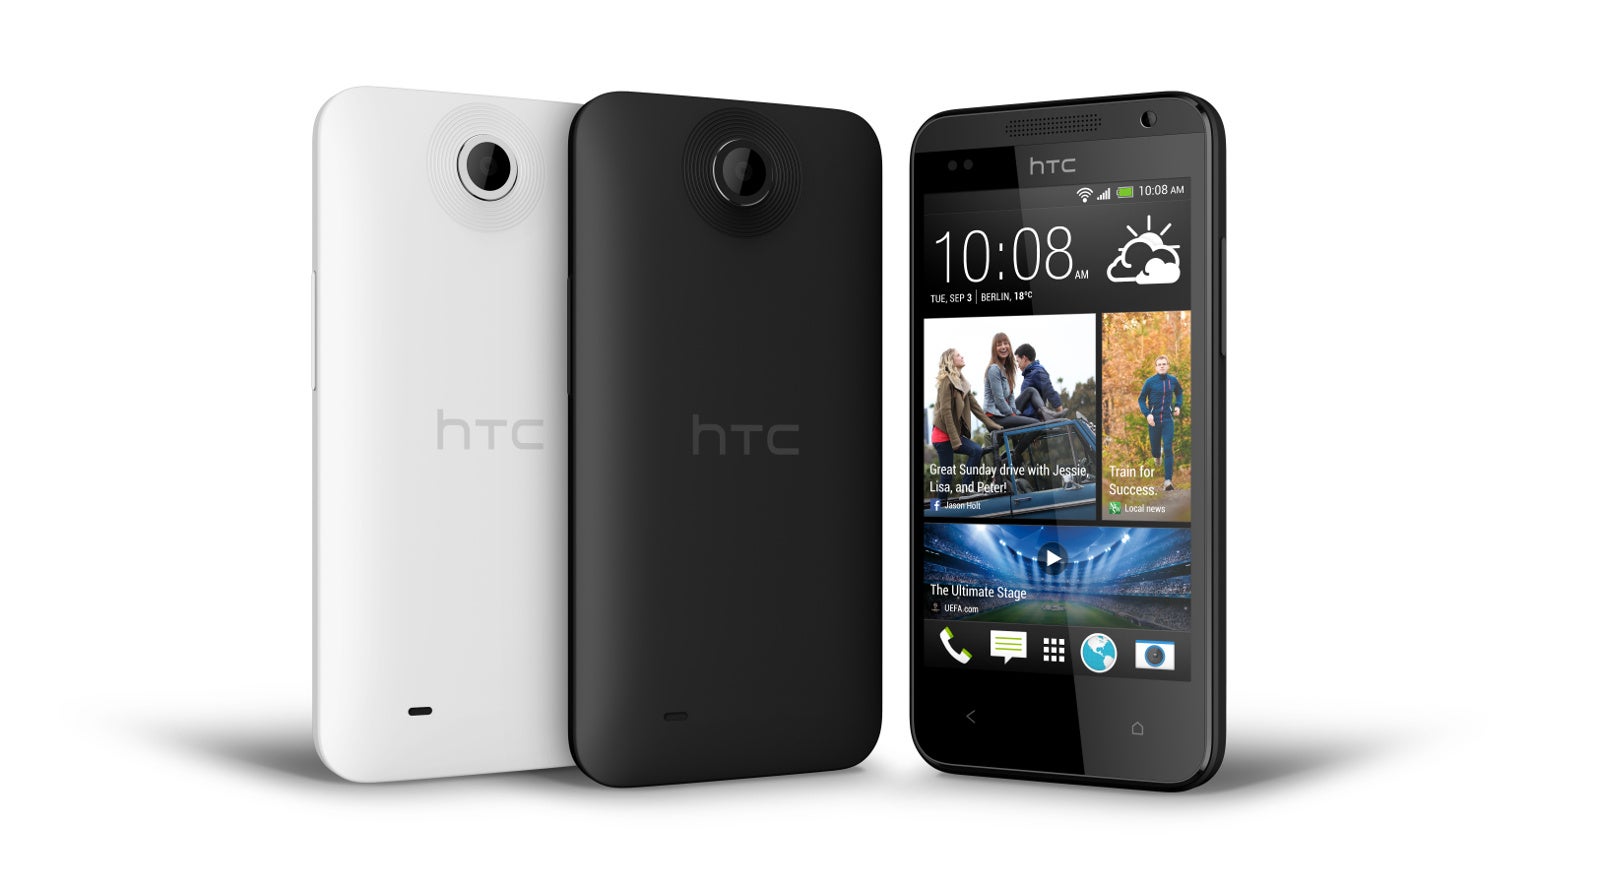 HTC Desire 300 goes official